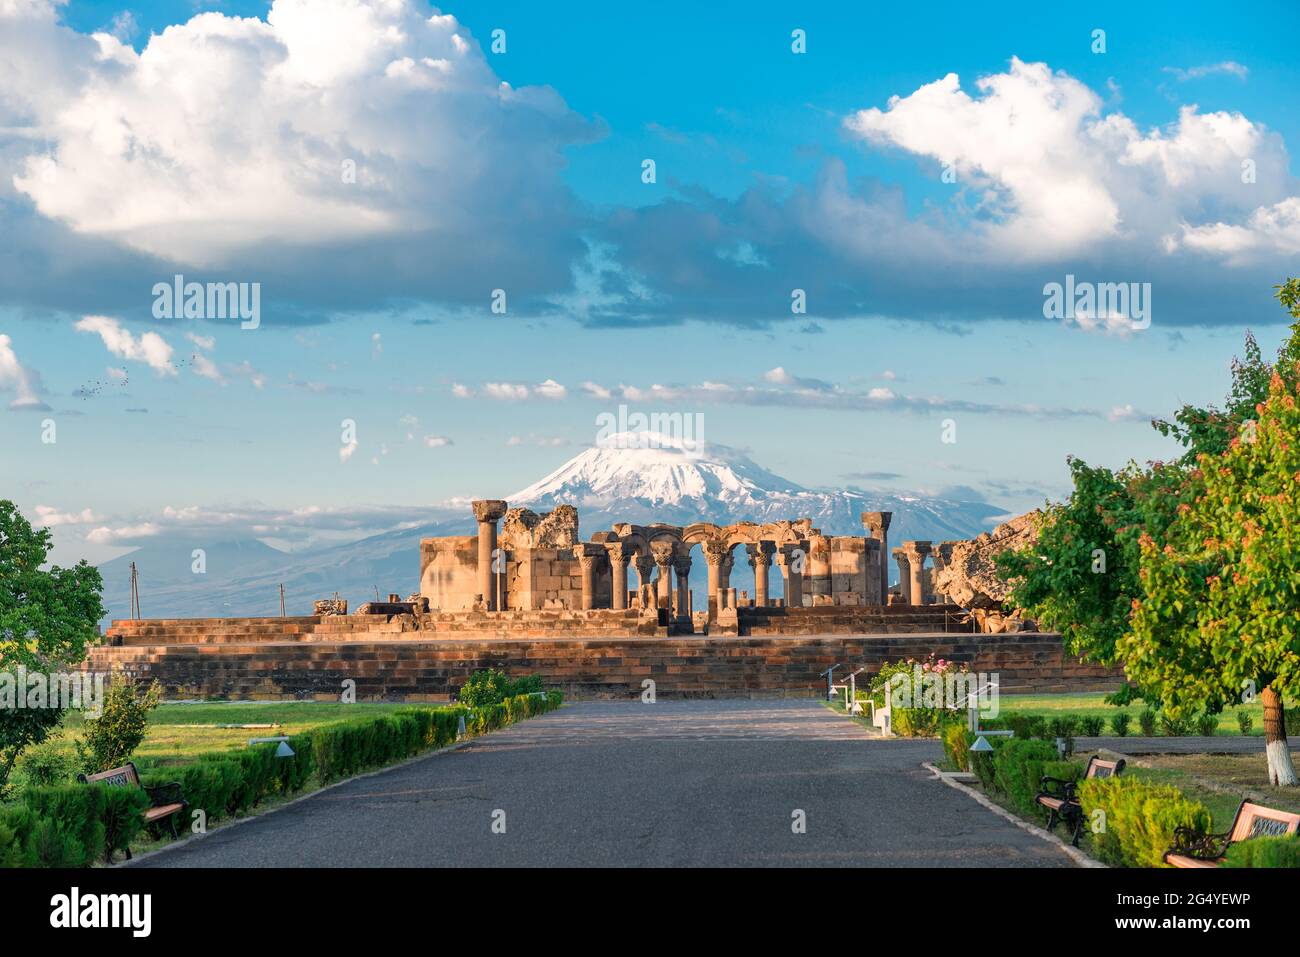 The ruins of the ancient Zvartnots temple on the background of a high snow-capped mountain Ararat, a landmark of Armenia Stock Photo